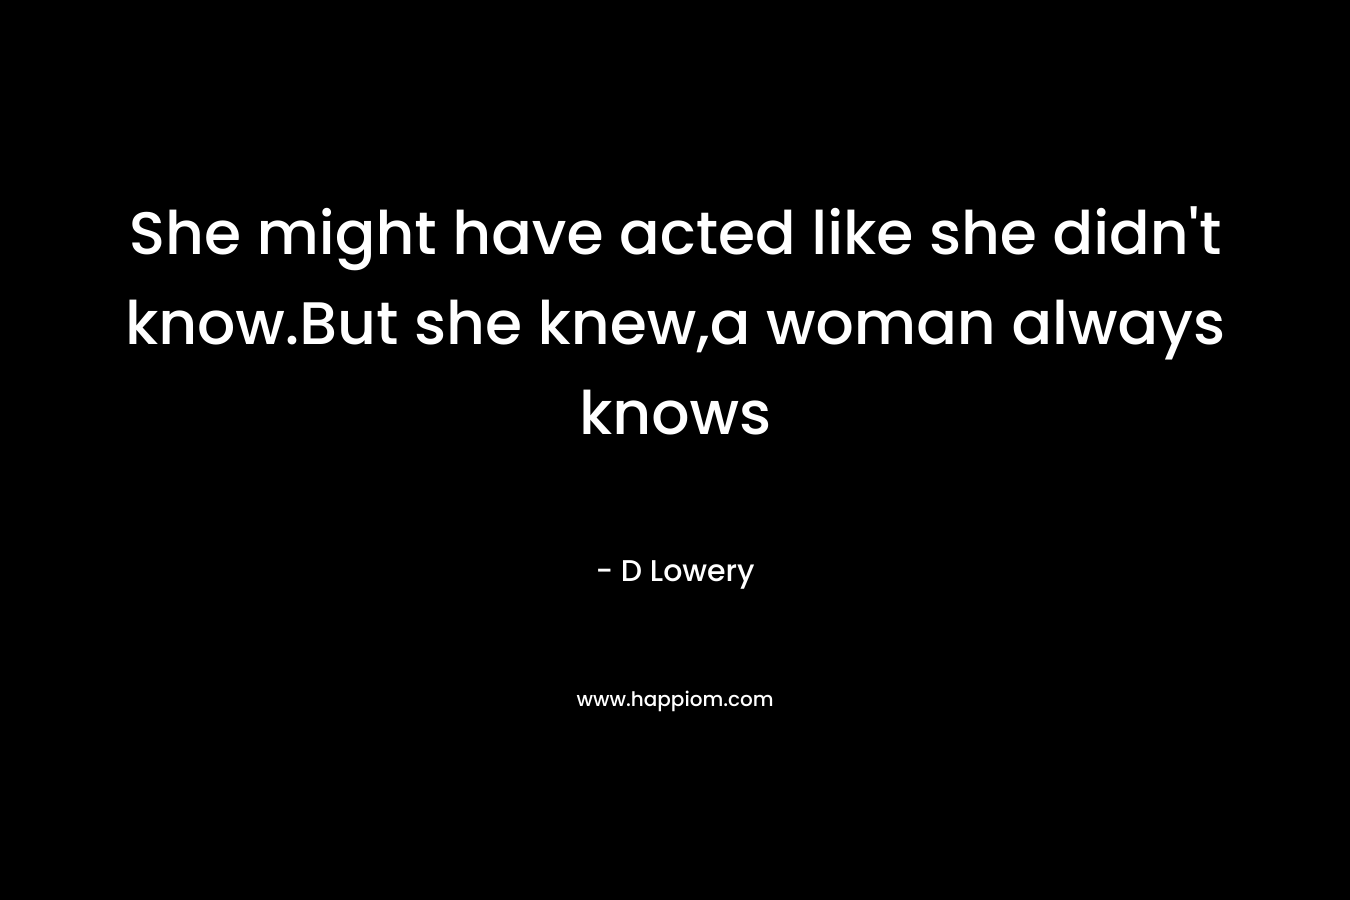 She might have acted like she didn't know.But she knew,a woman always knows